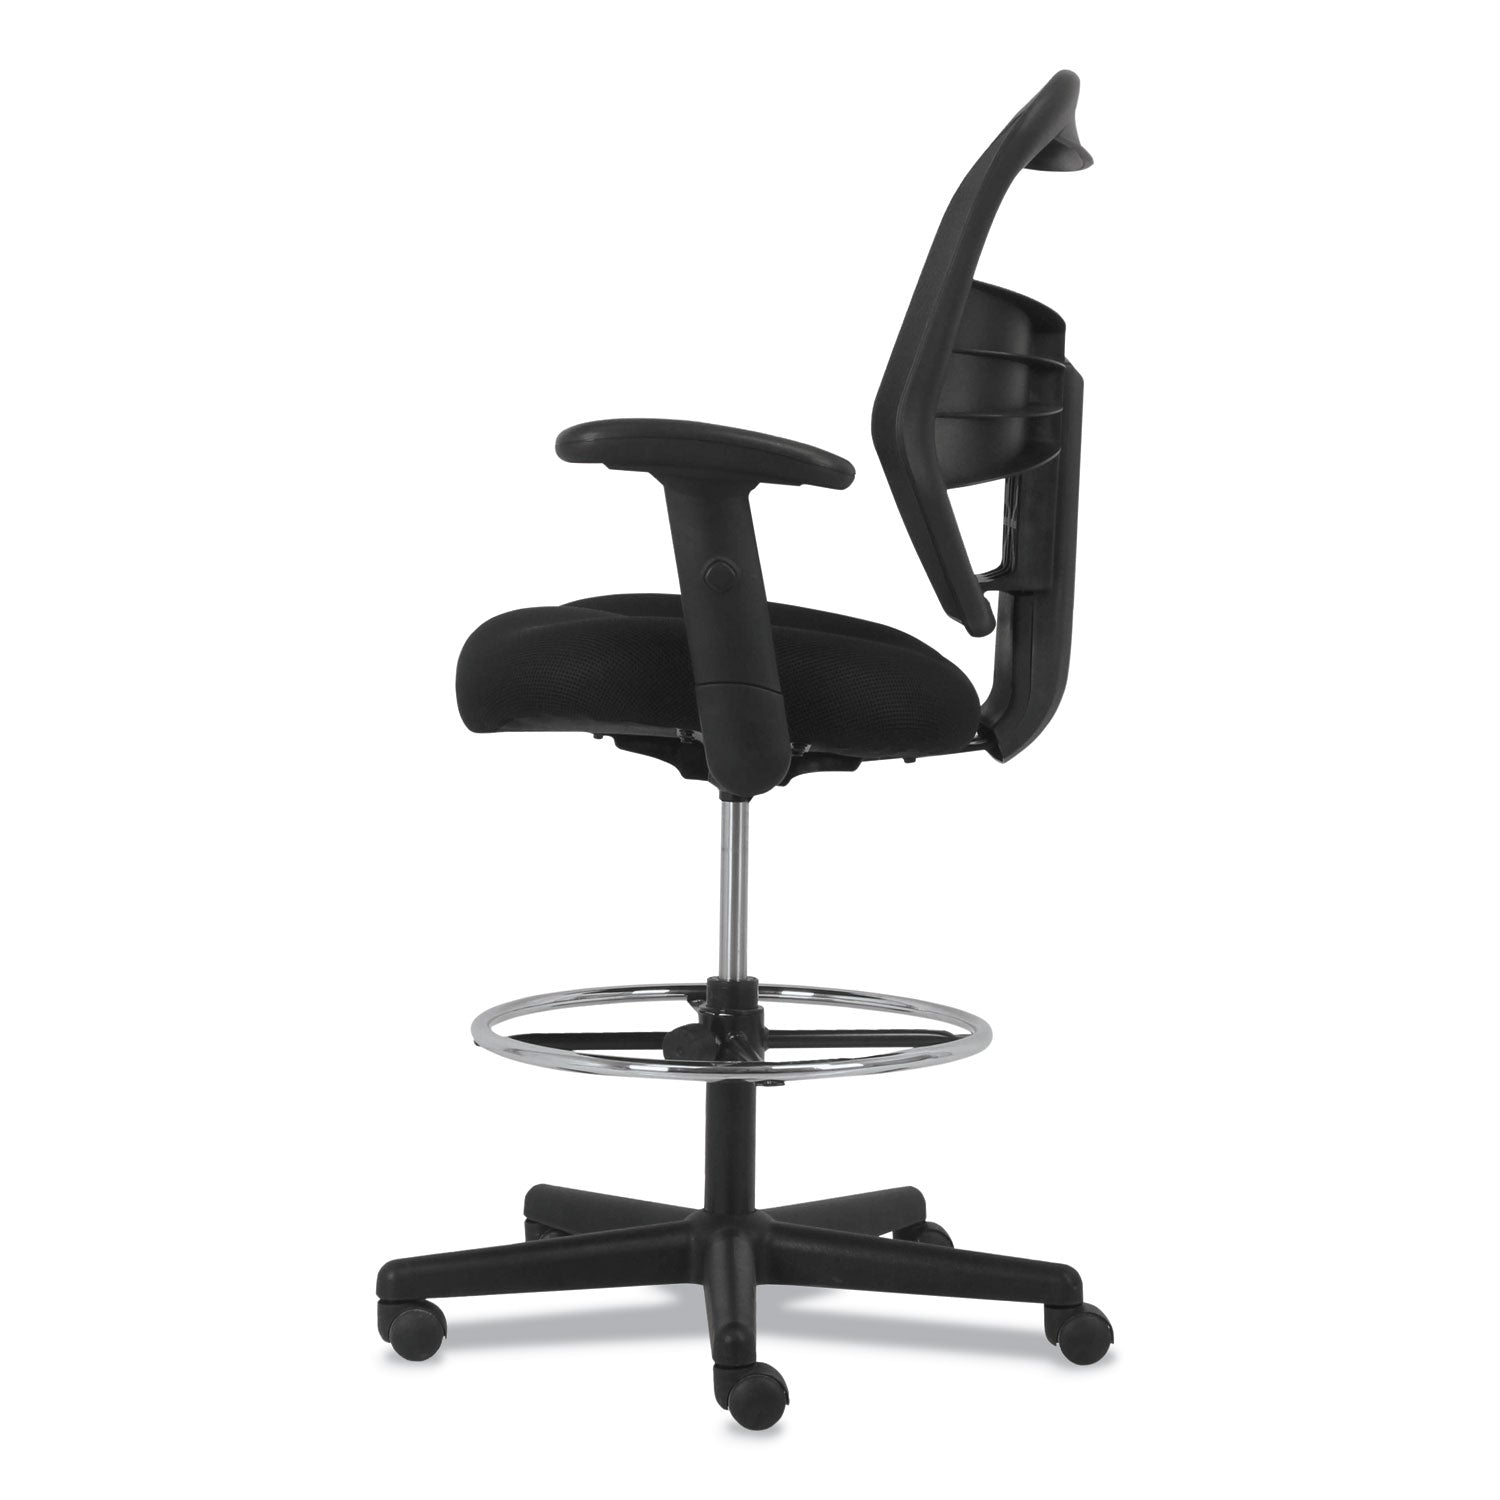 prominent-high-back-task-stool-supports-up-to-250-lb-21-to-281-seat-height-black_honvl539mm10 - 4